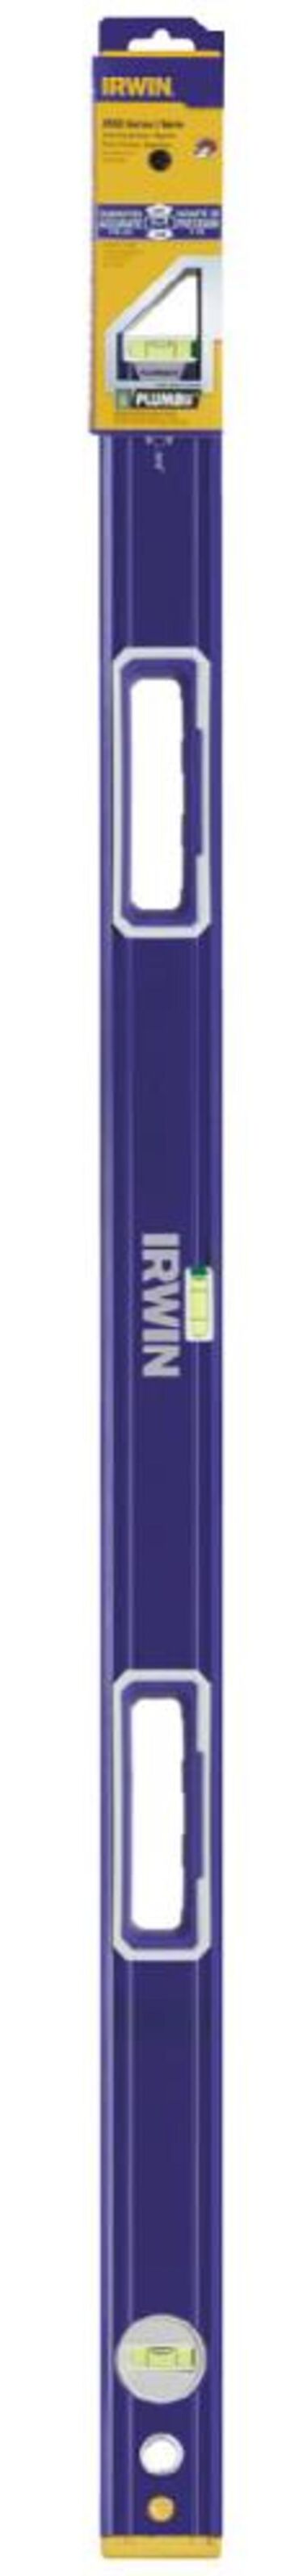 Irwin 48 In. 2550 Magnetic Box Beam Level, large image number 0